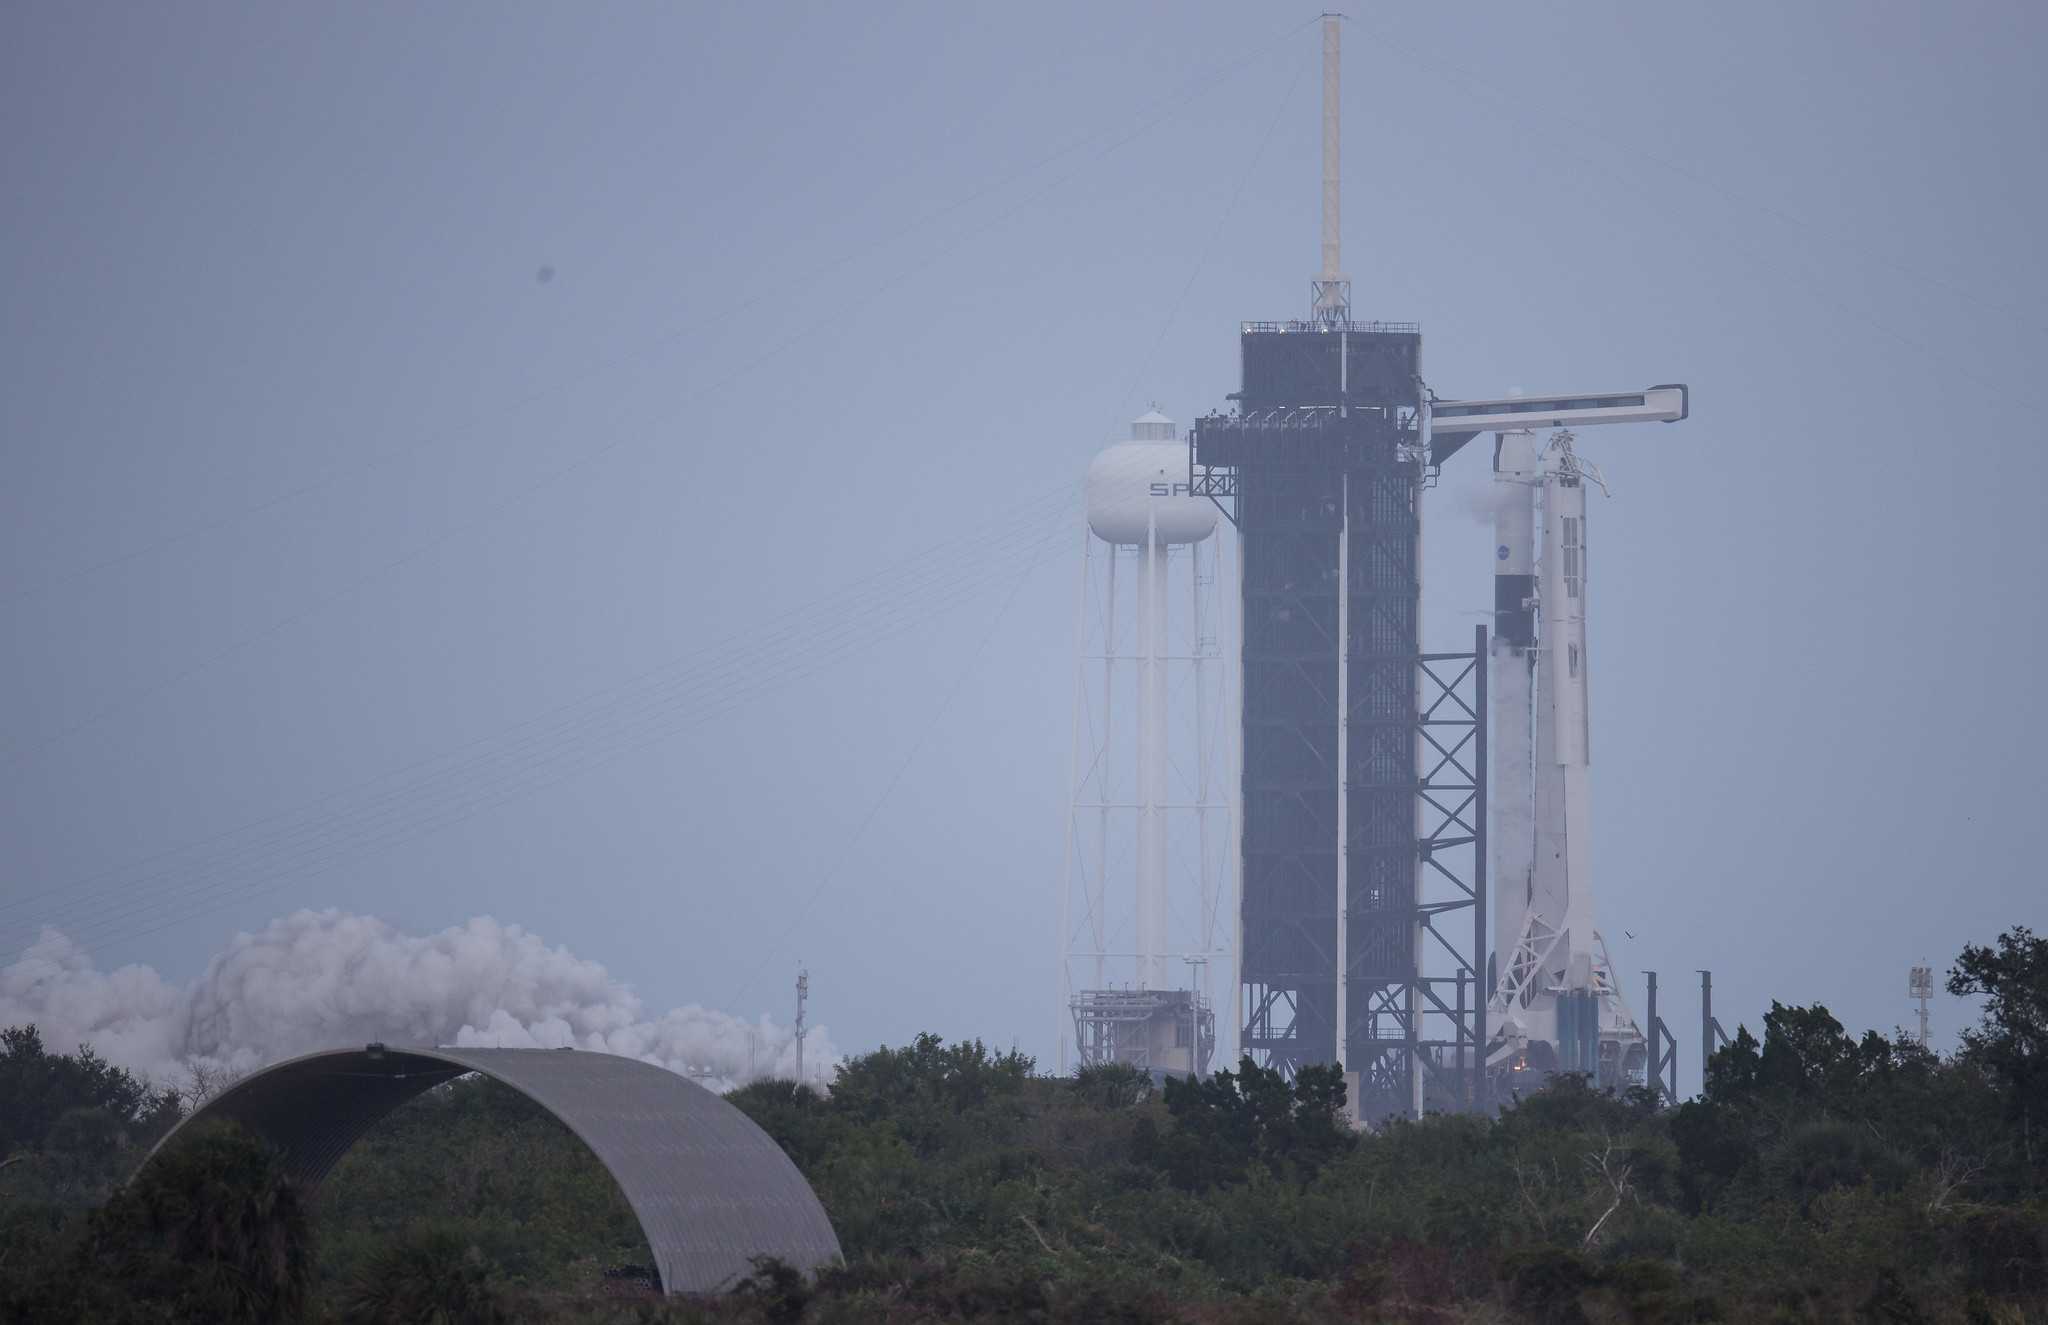 A SpaceX Falcon 9 rocket test fires its first-stage engines briefly atop Pad 39A at NASA's Kennedy Space Center in Cape Canaveral, Florida on Nov. 11, 2020. The rocket will launch the Crew-1 astronaut mission for NASA on Nov. 14.